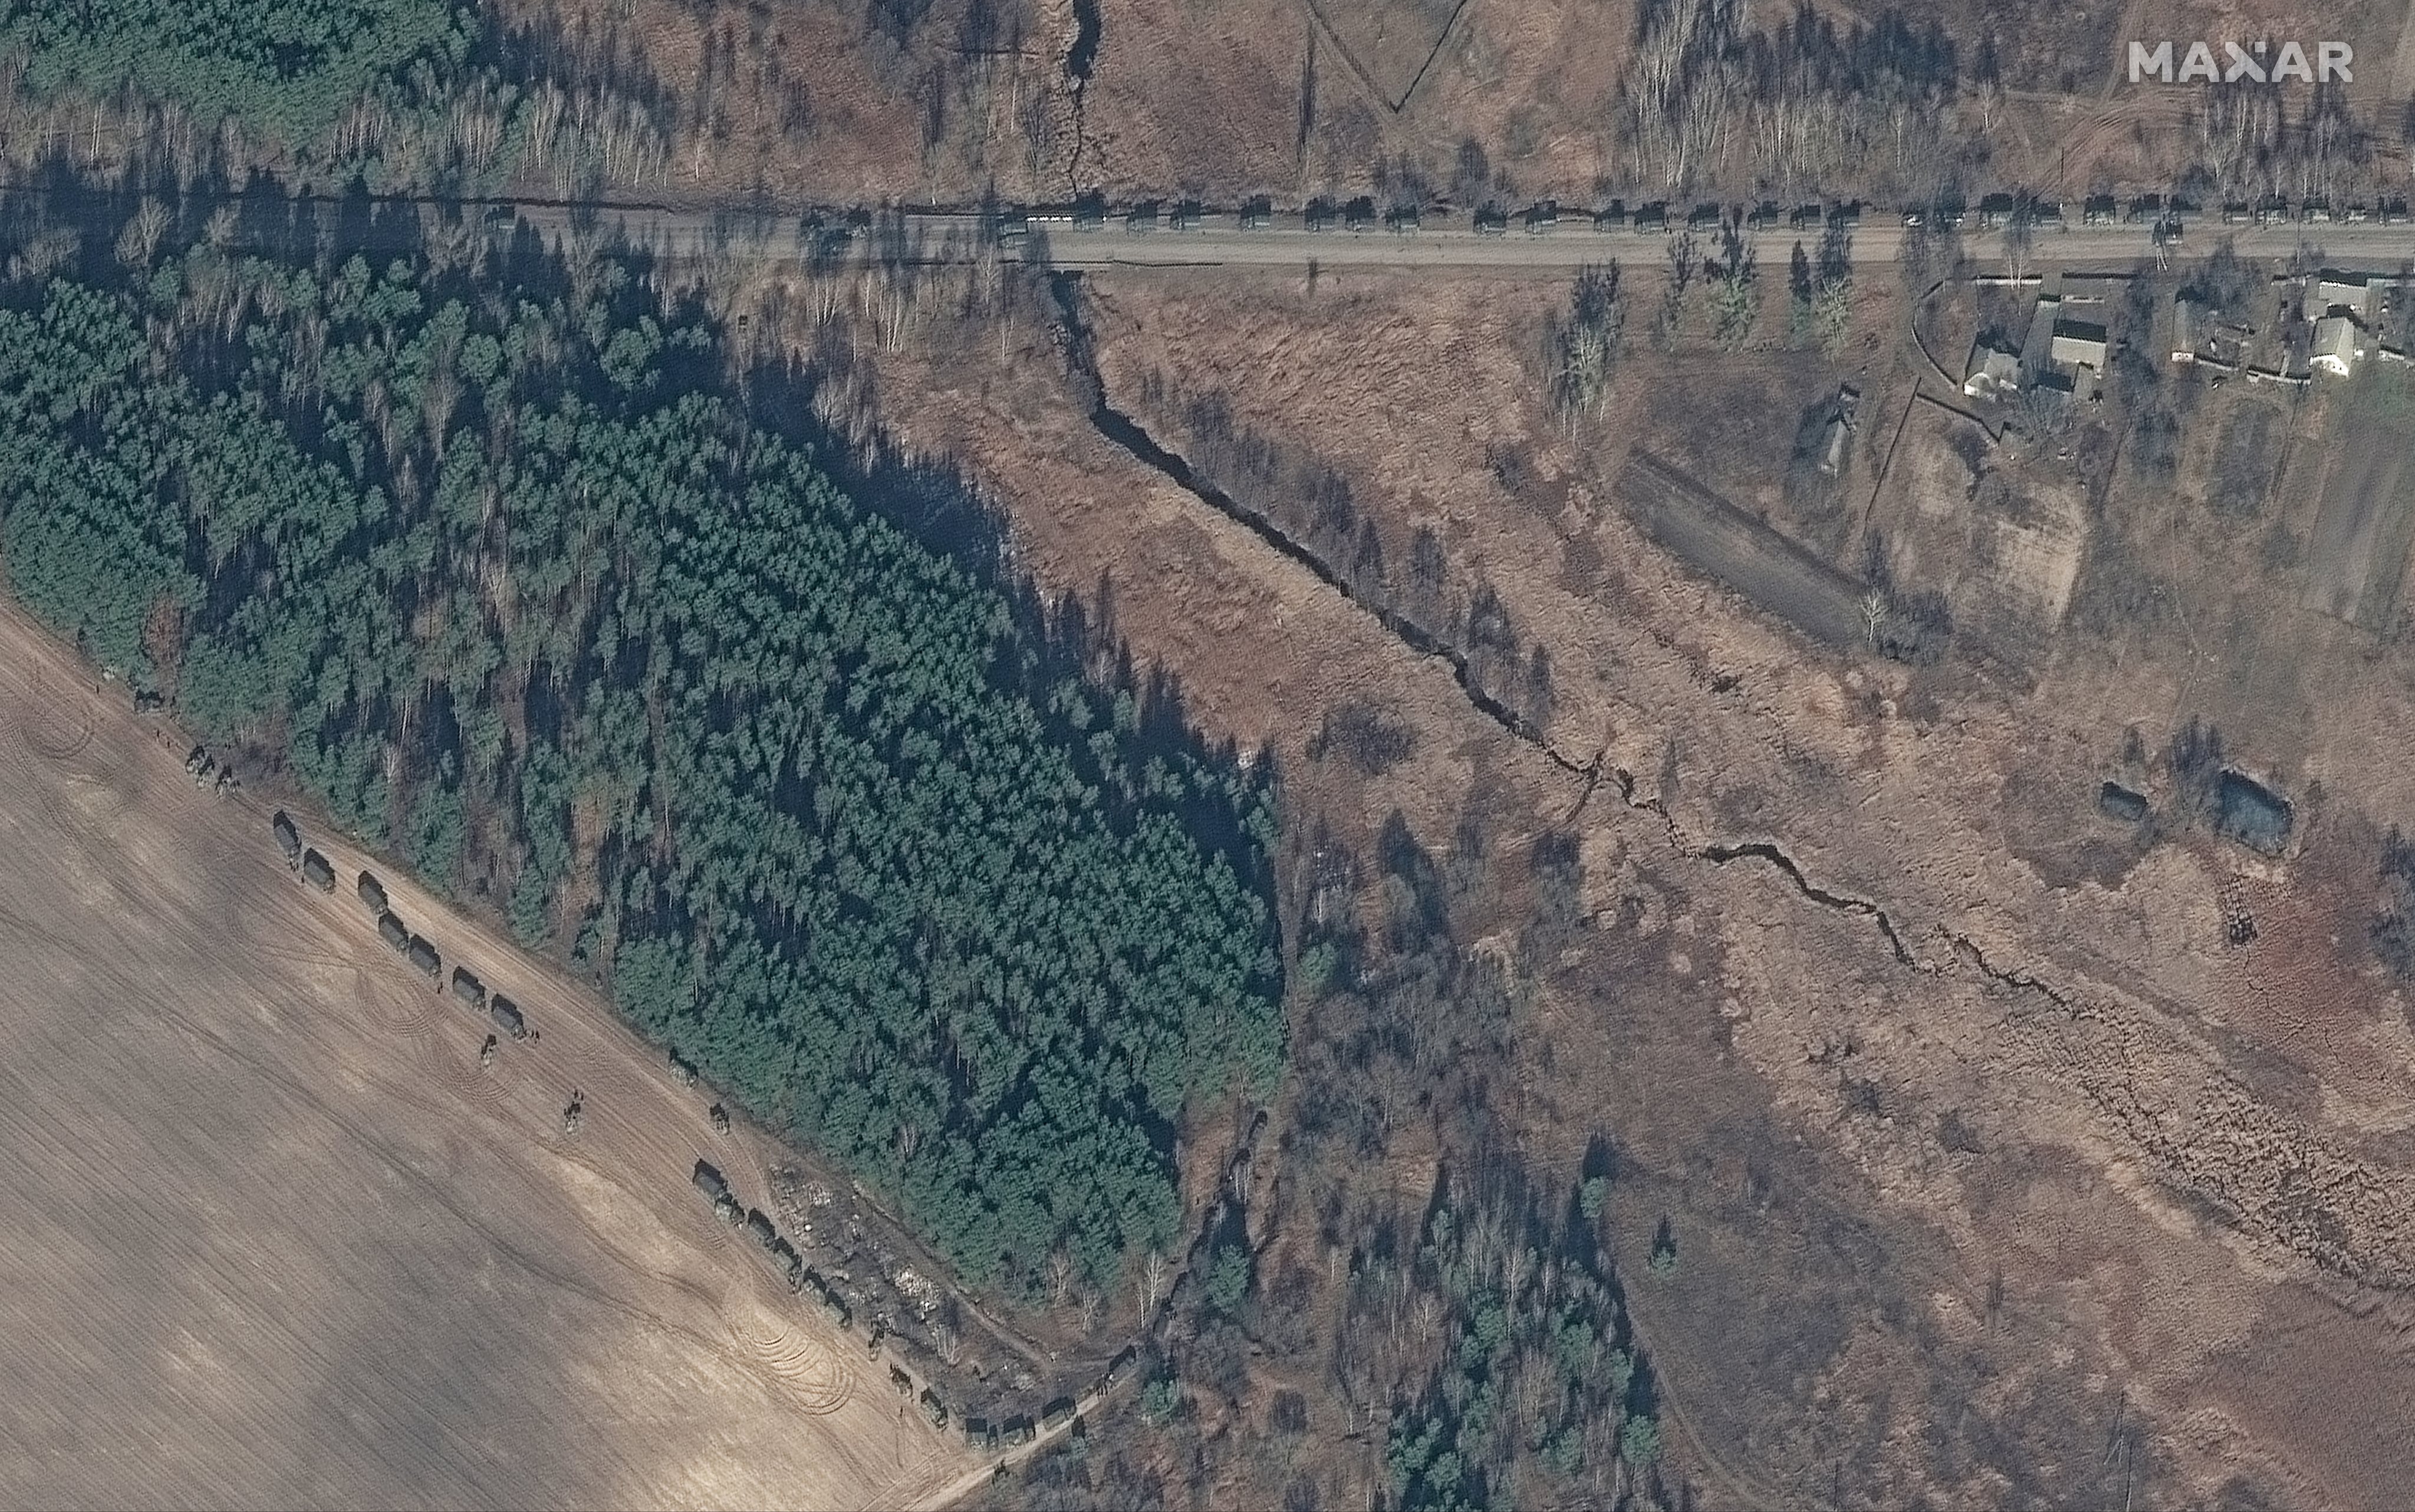 RUSSIANS INVADE UKRAINE -- FEBRUARY 27, 2022:  04 A diffferent Maxar high-resolution satellite close up view of armored equipment and ground forces convoy, Ivankiv, Ukraine.  27feb2022_wv3.  Please use: Satellite image (c) 2022 Maxar Technologies.